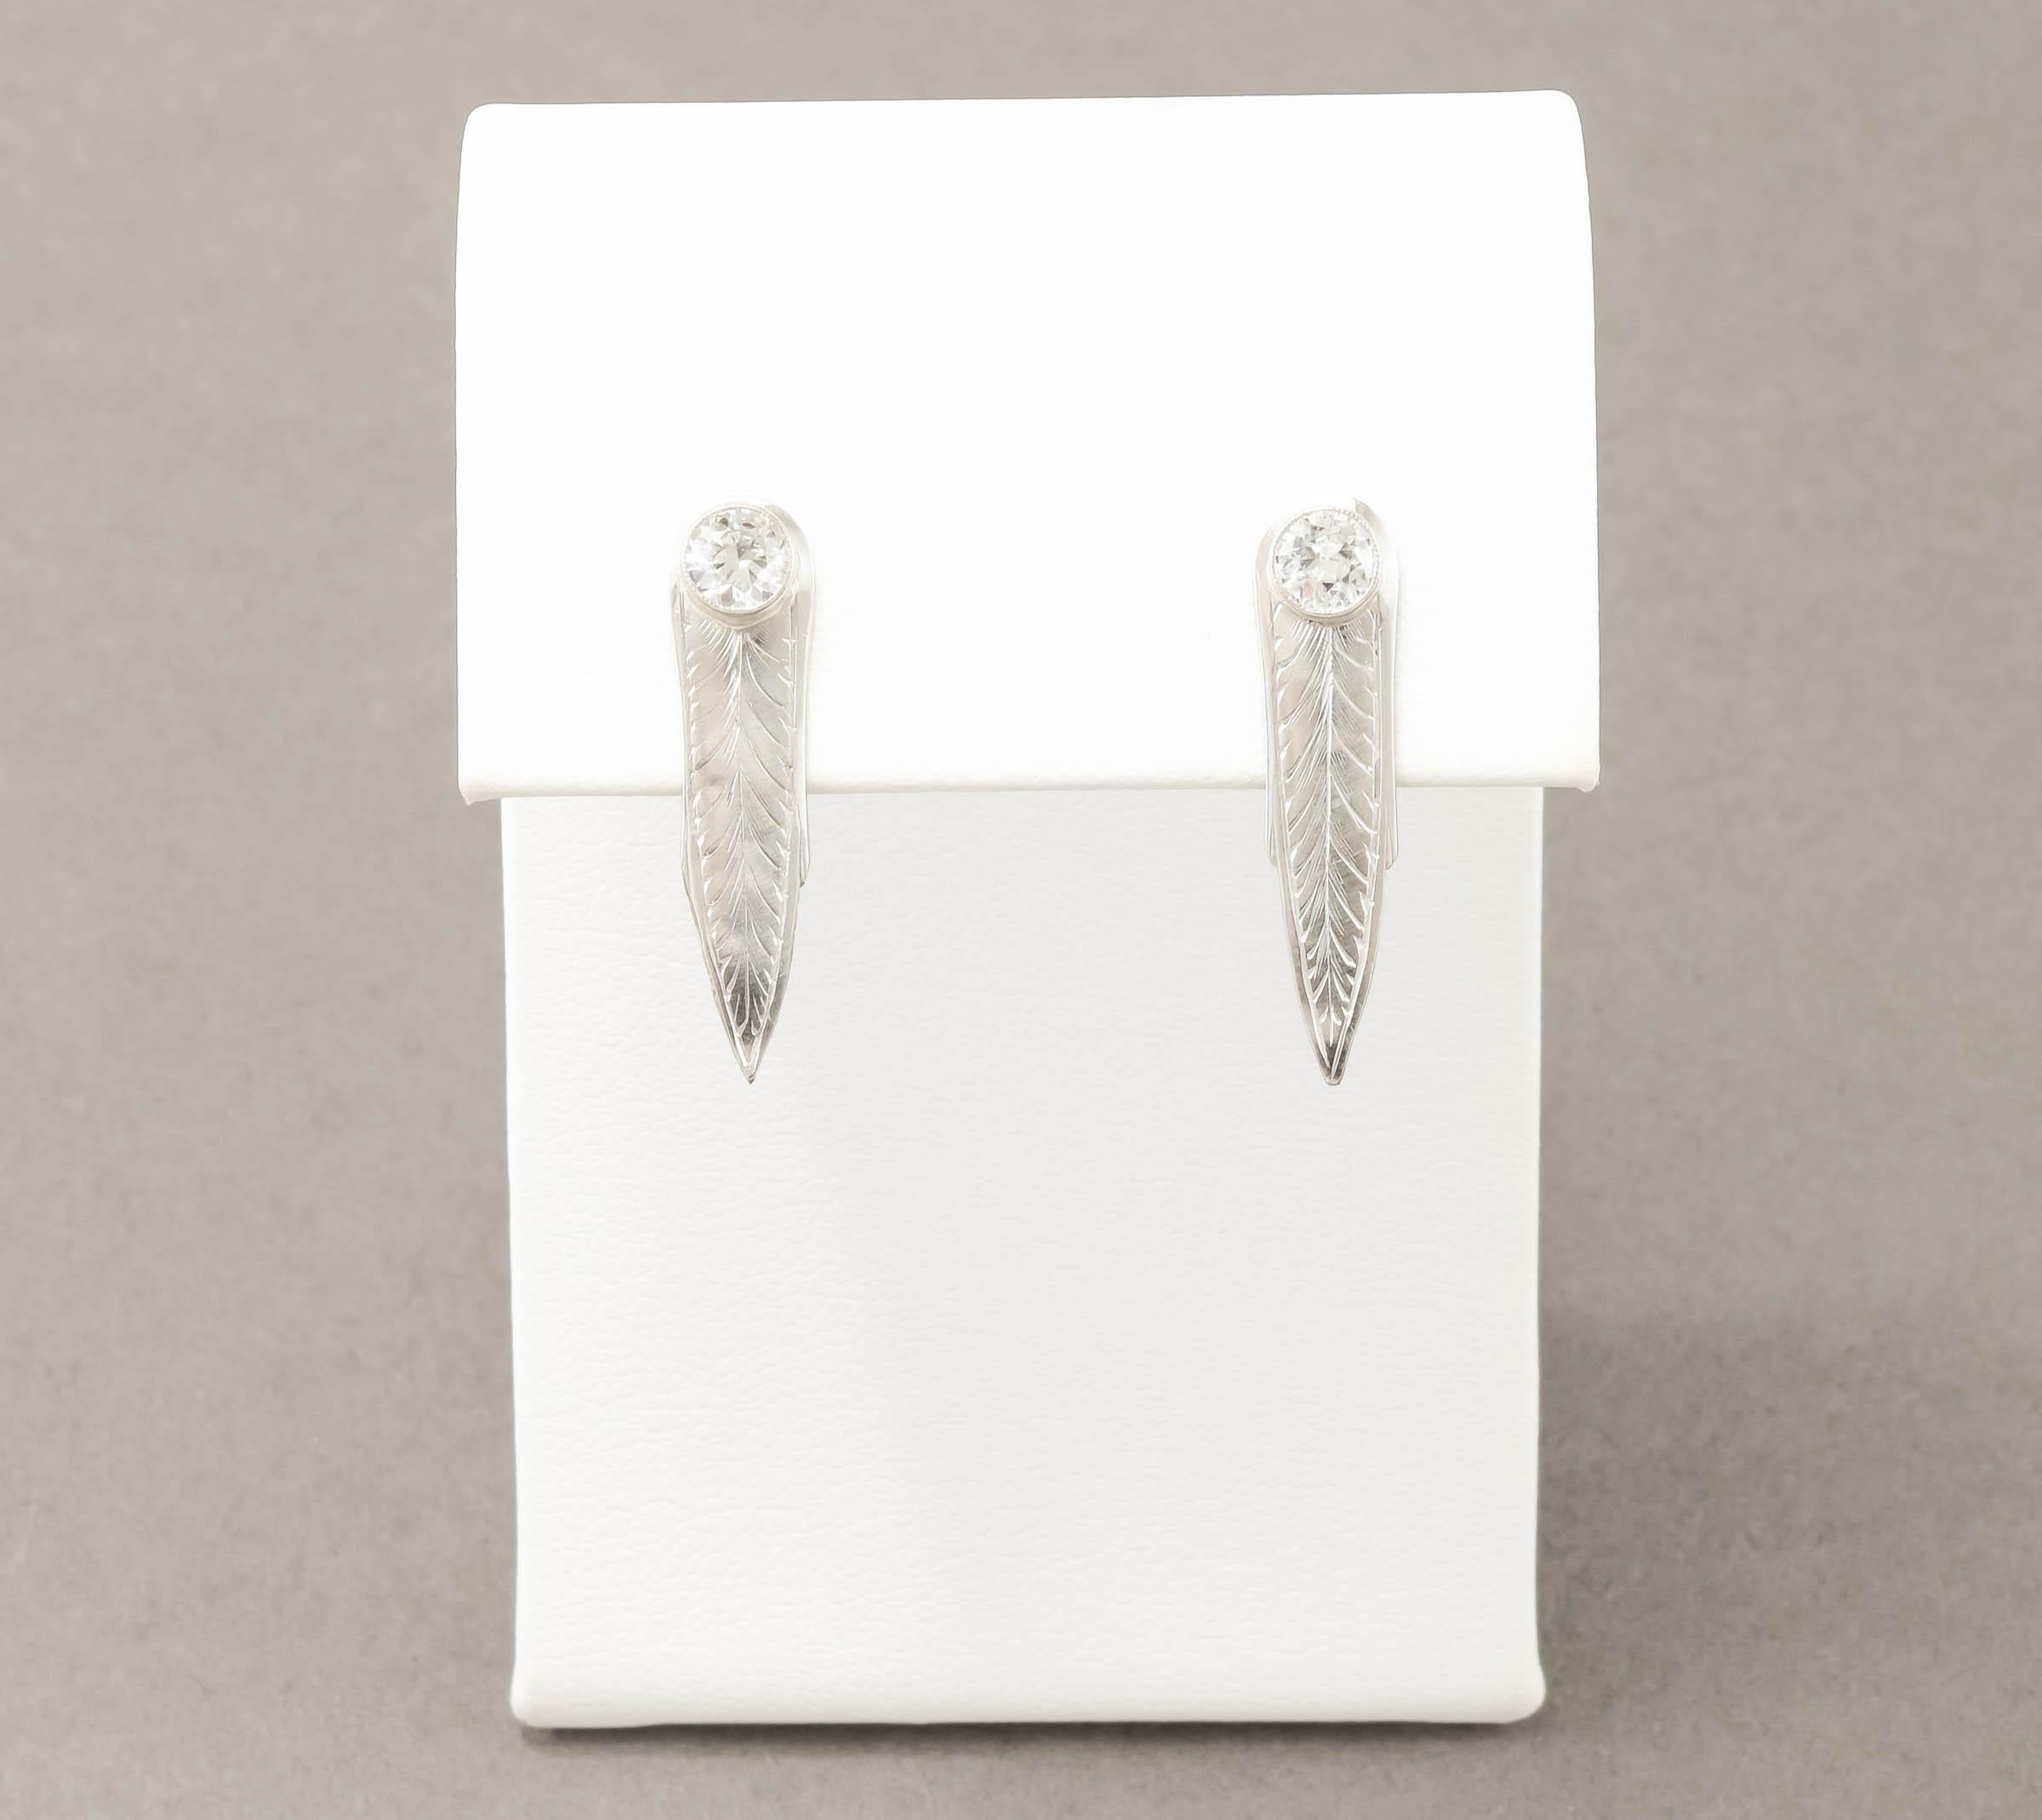 Hand Engraved Leaf Feather Diamond Earrings - Old European Cut Diamonds .90 ctw For Sale 4